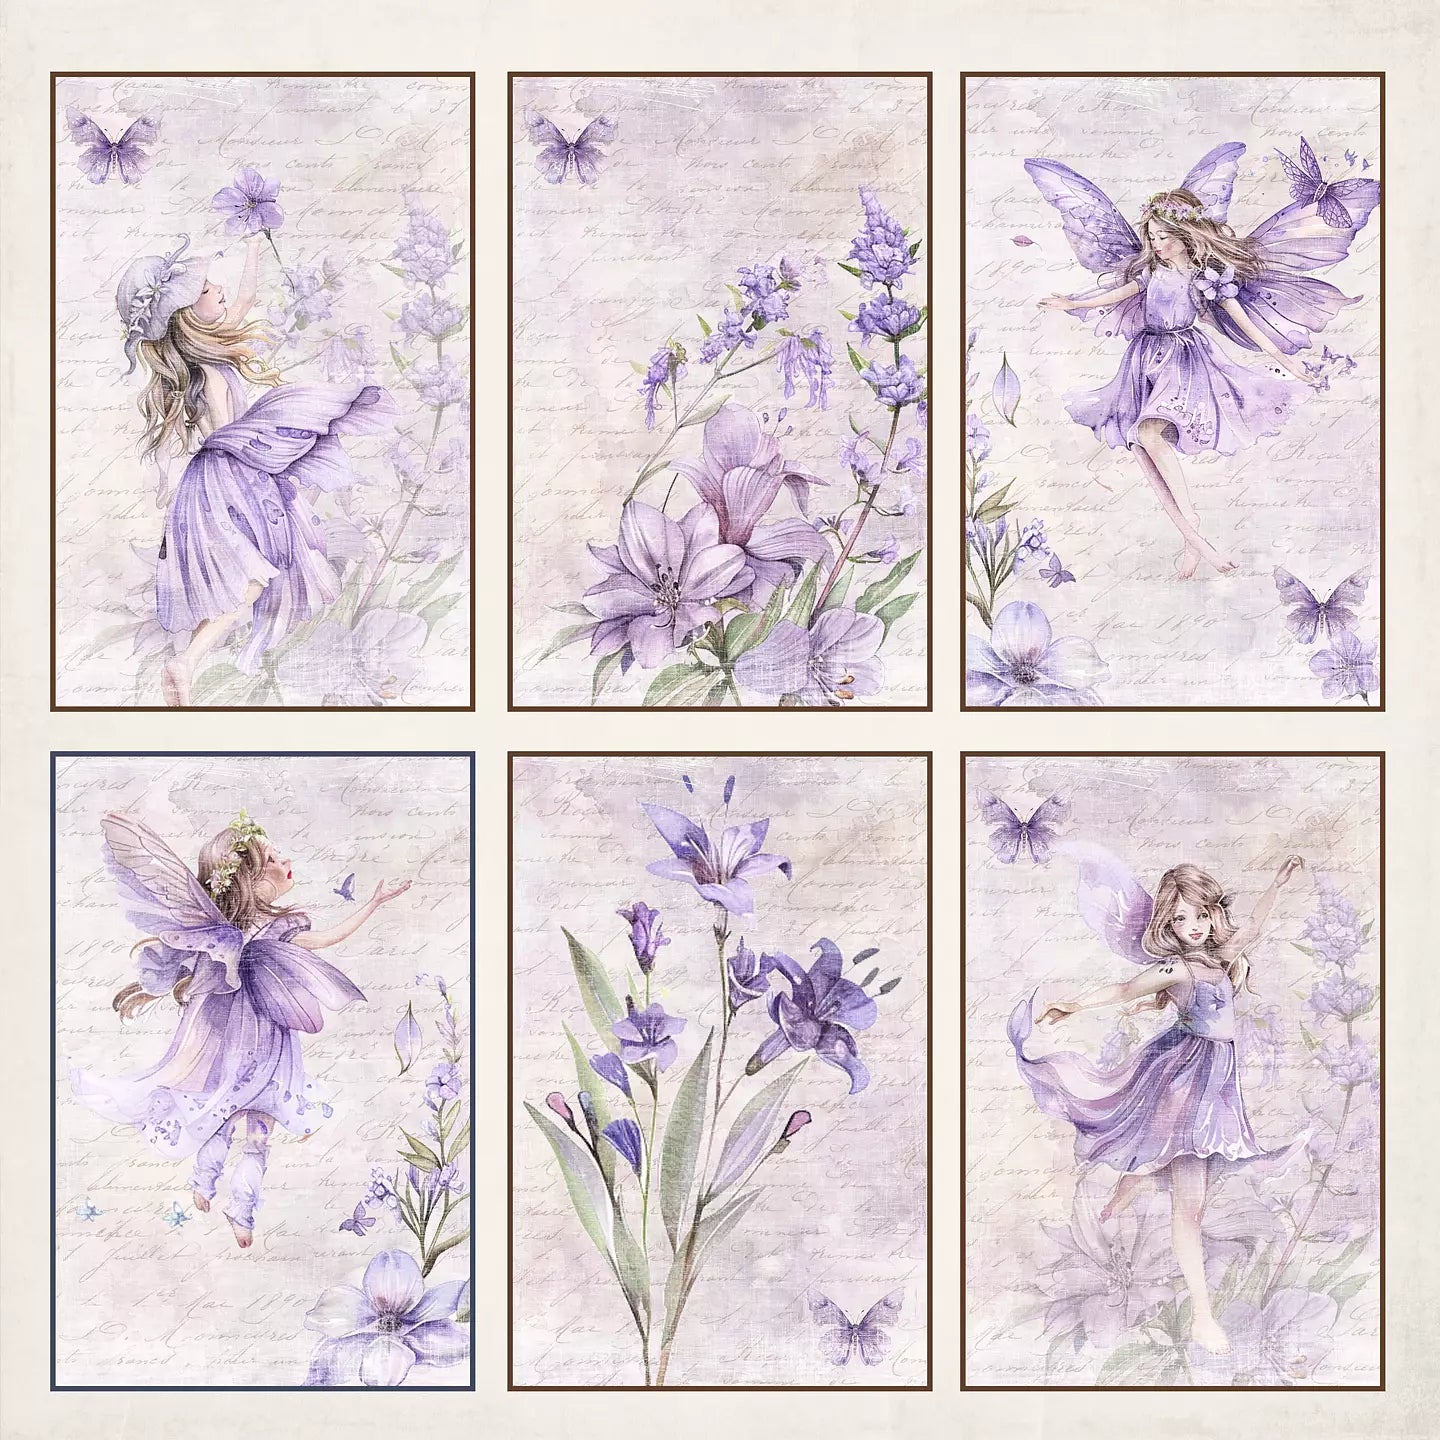 NYHET! Reprint Paperpack - Fairies Collection Paperpack - 6x6